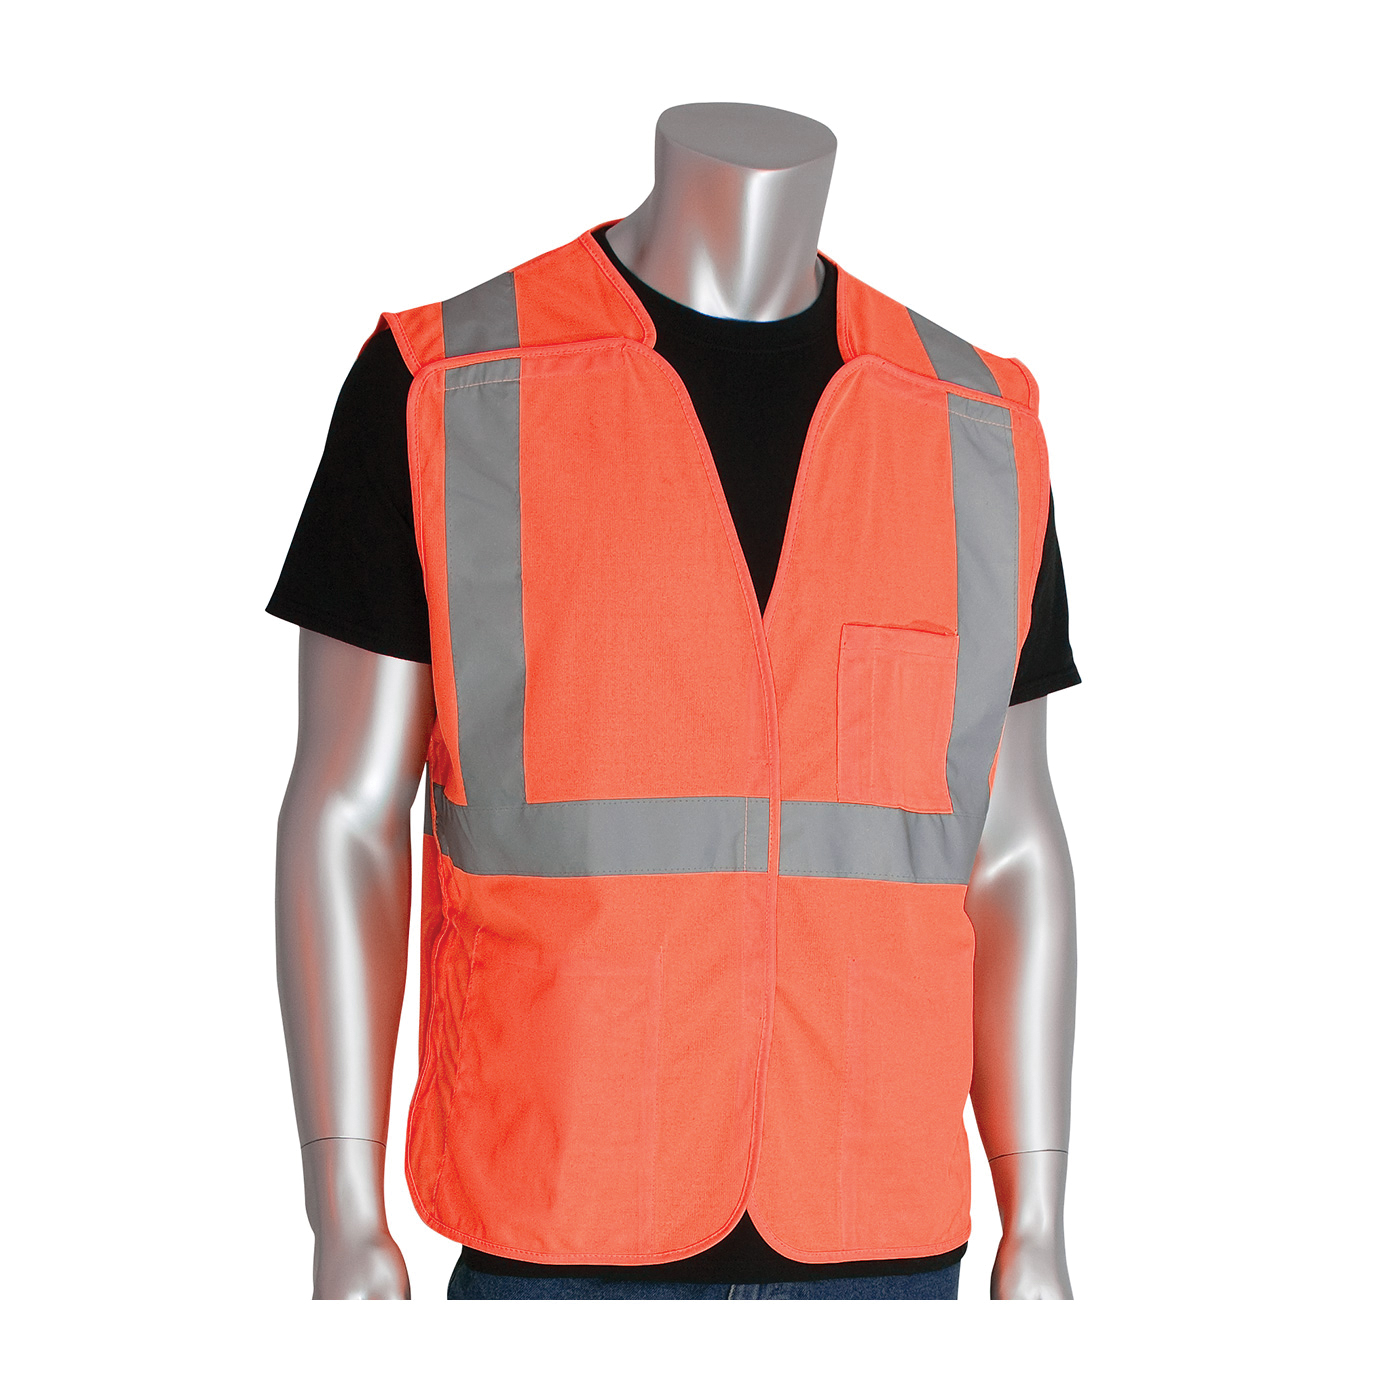 PIP® 302-5PVOR-S Safety Vest, S, Hi-Viz Orange, Polyester, Hook and Loop Closure, 3 Pockets, ANSI Class: Class 2, Specifications Met: ANSI 107 Type R